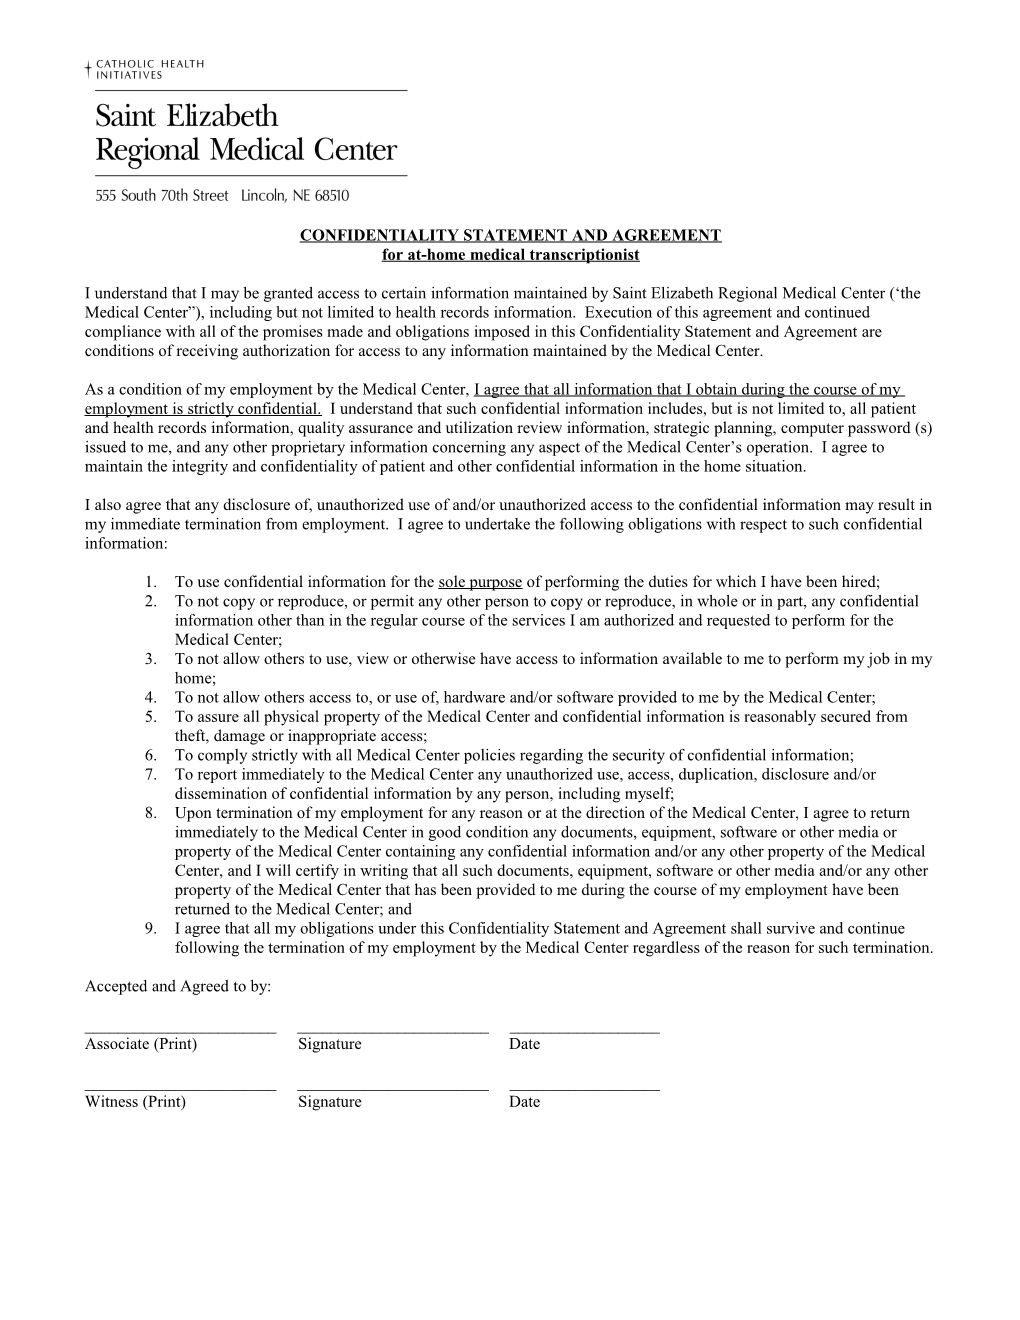 Confidentiality Statement and Agreement